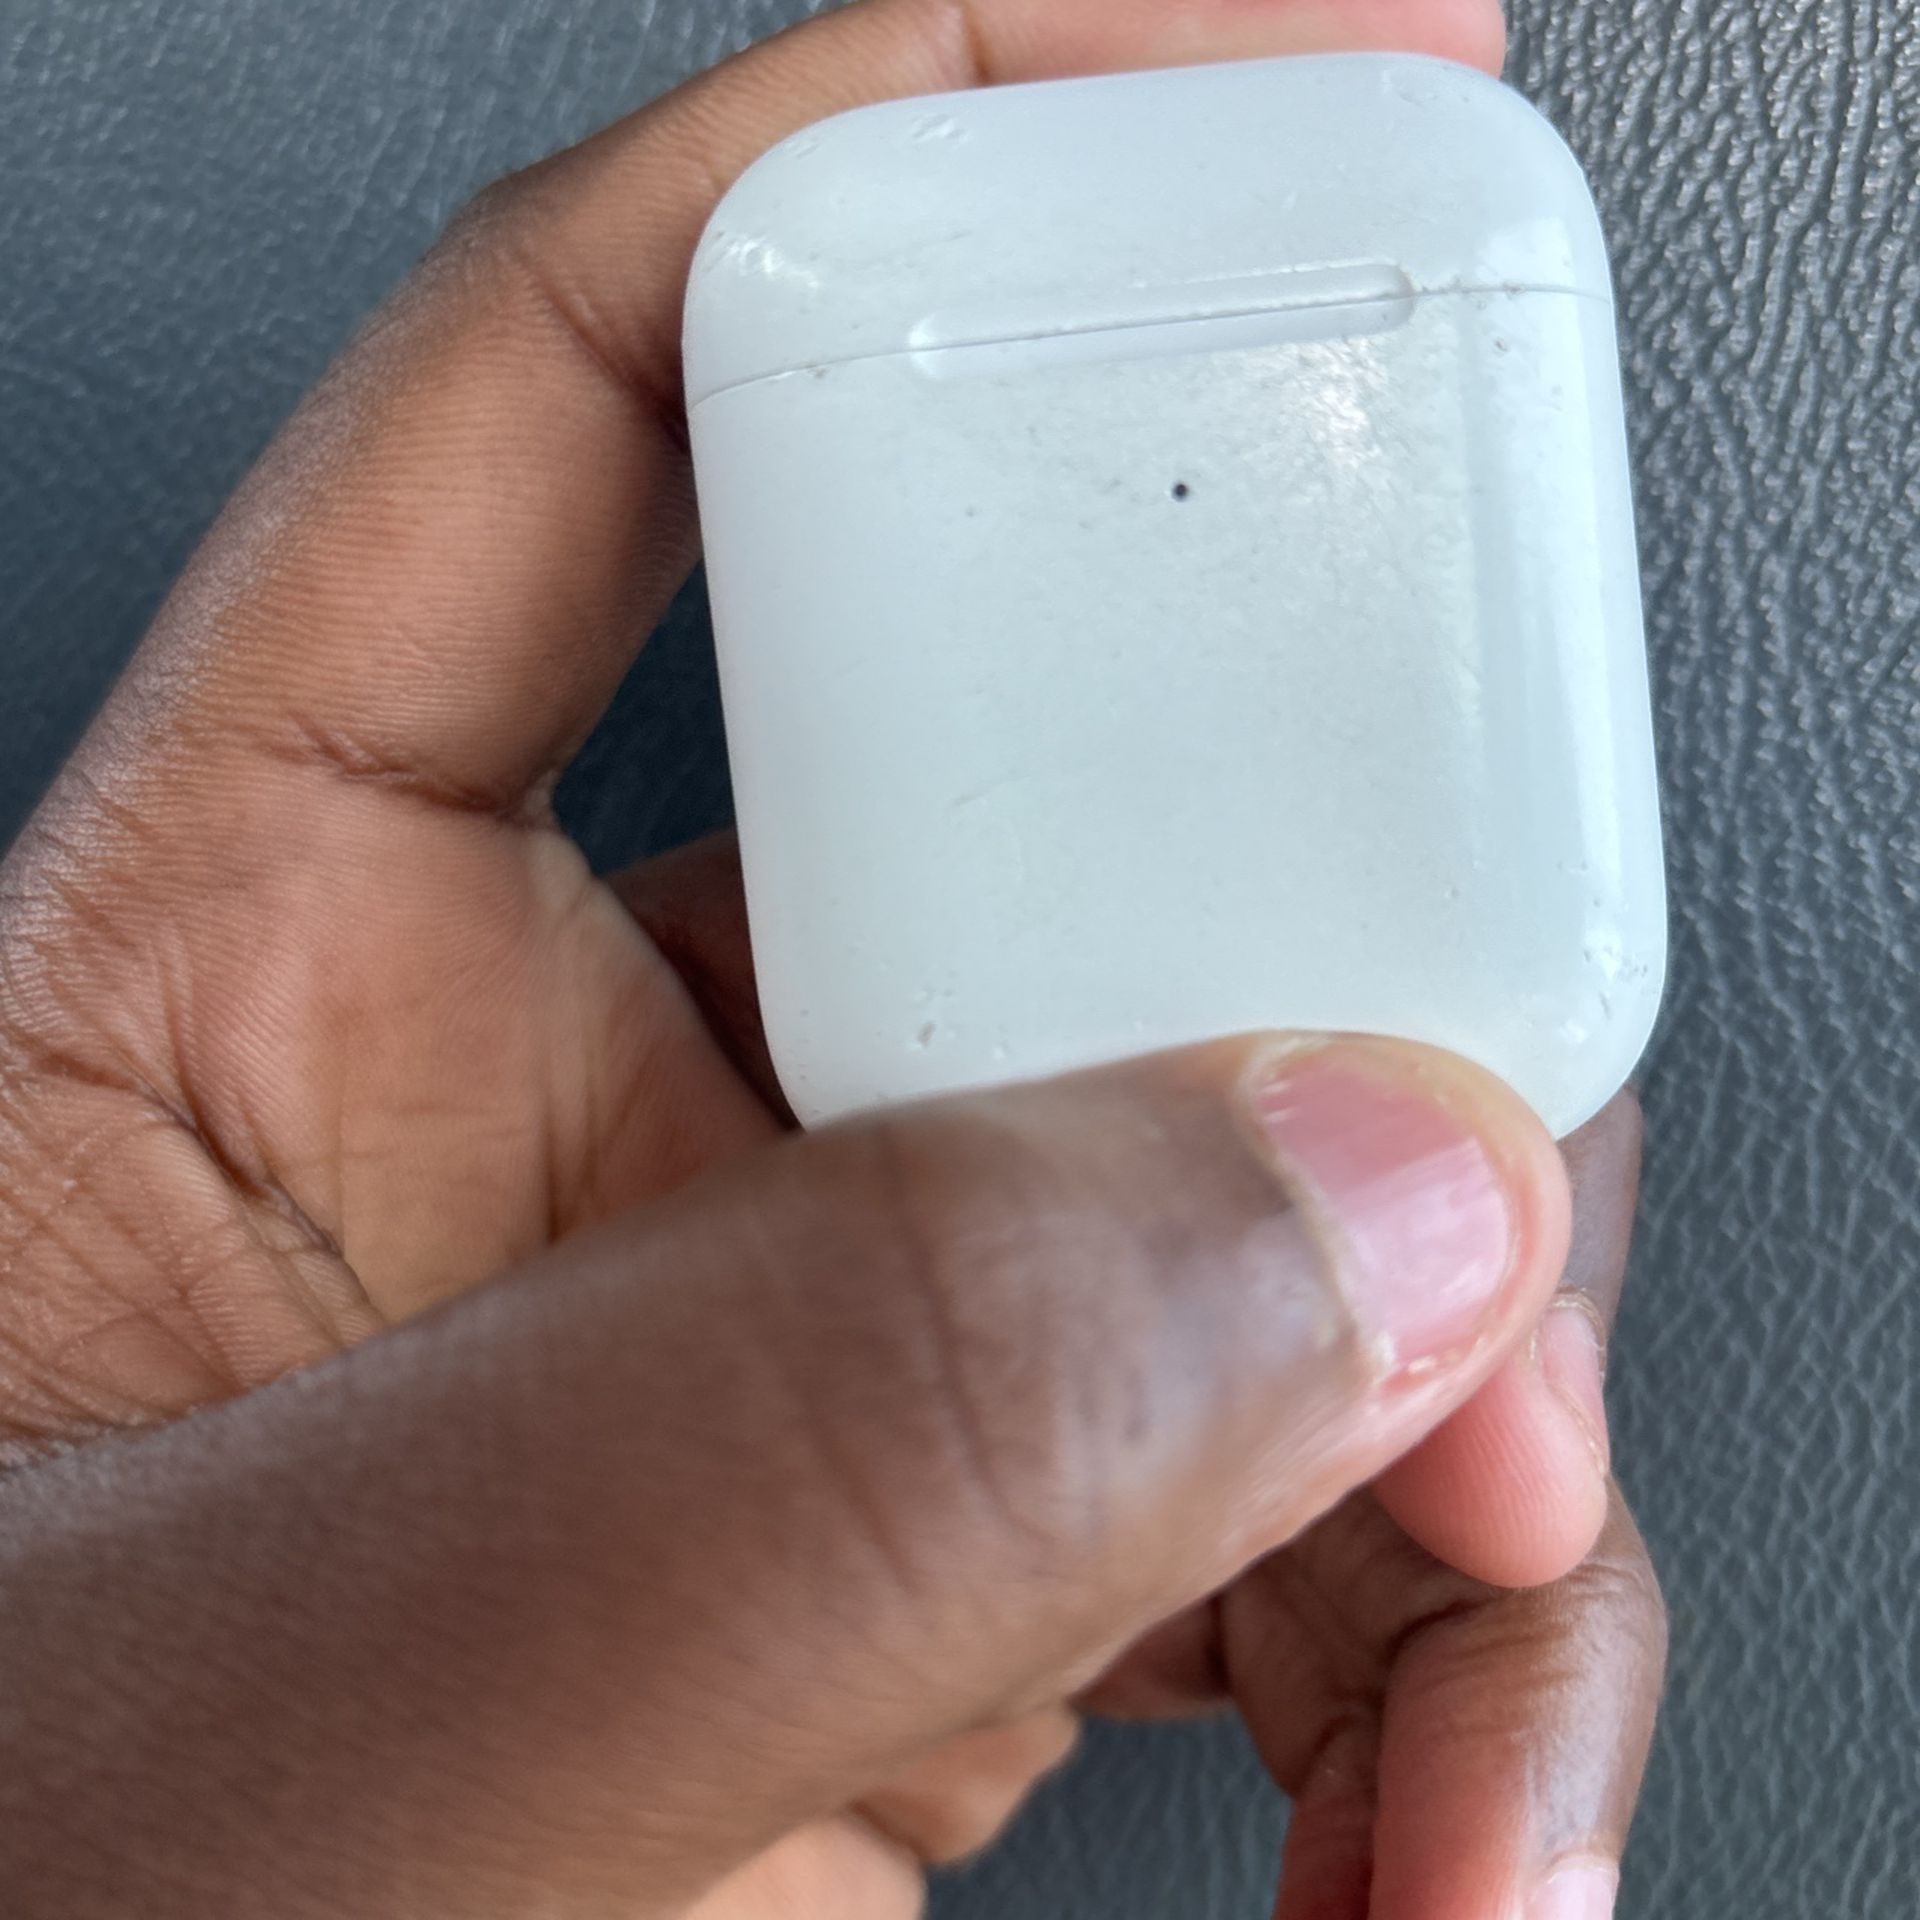 Slightly used air pods